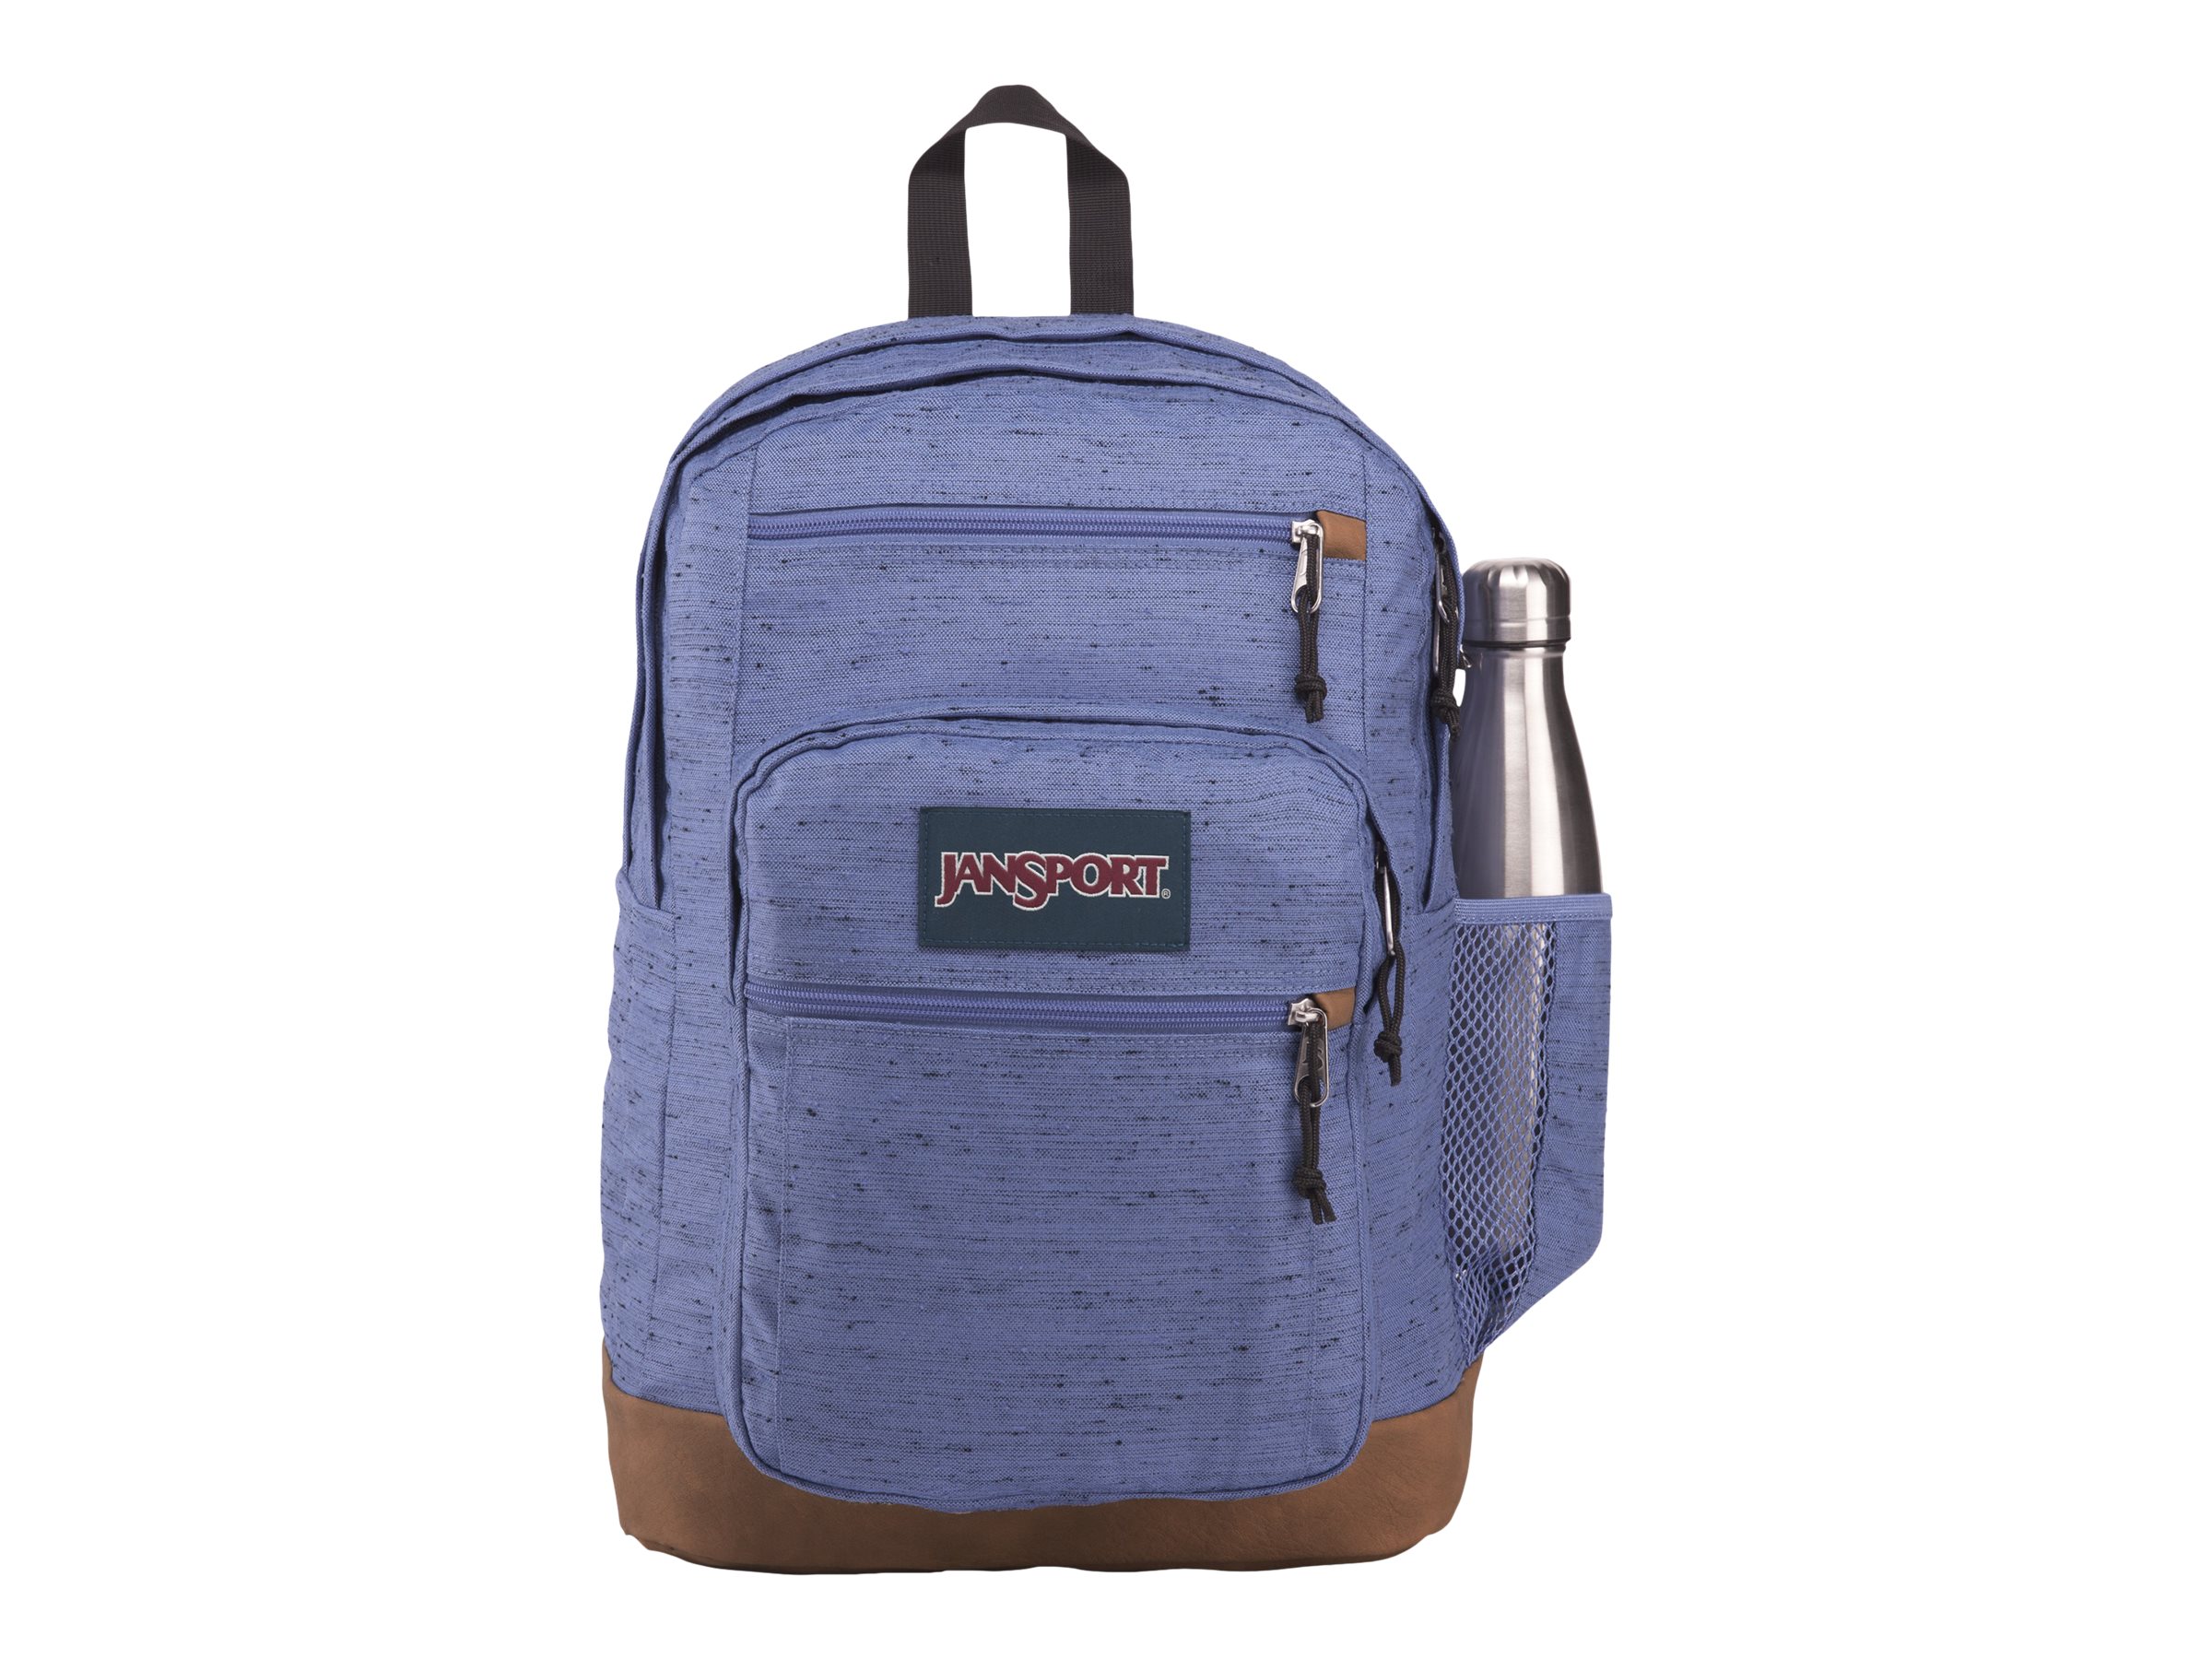 JanSport Cool Student - Notebook carrying backpack - 15" - image 3 of 4